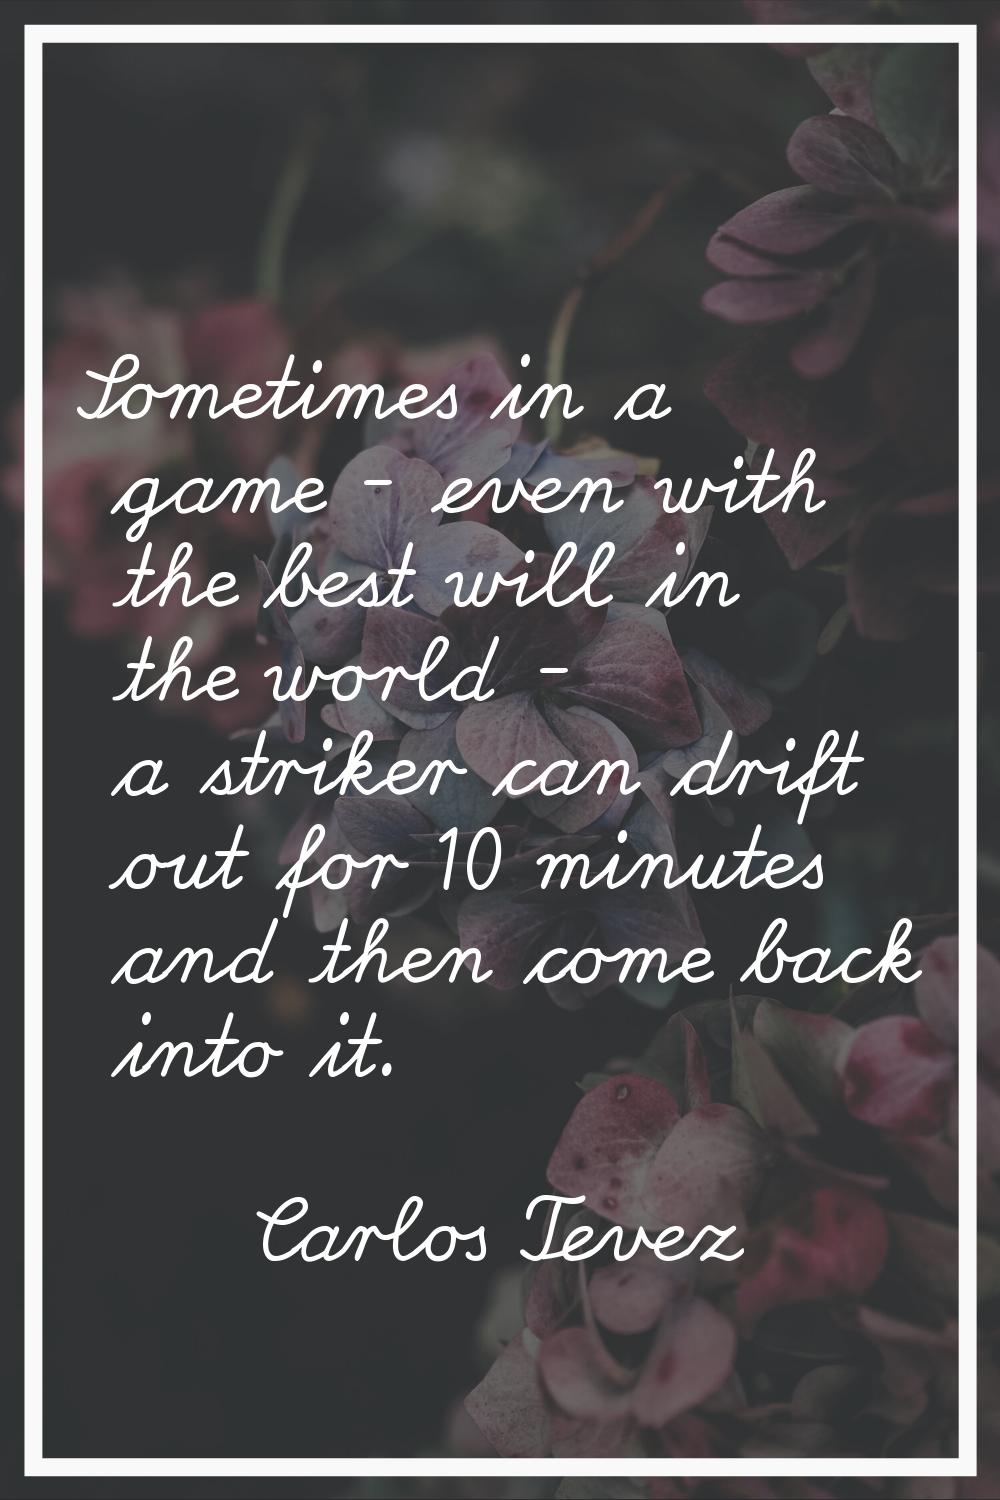 Sometimes in a game - even with the best will in the world - a striker can drift out for 10 minutes